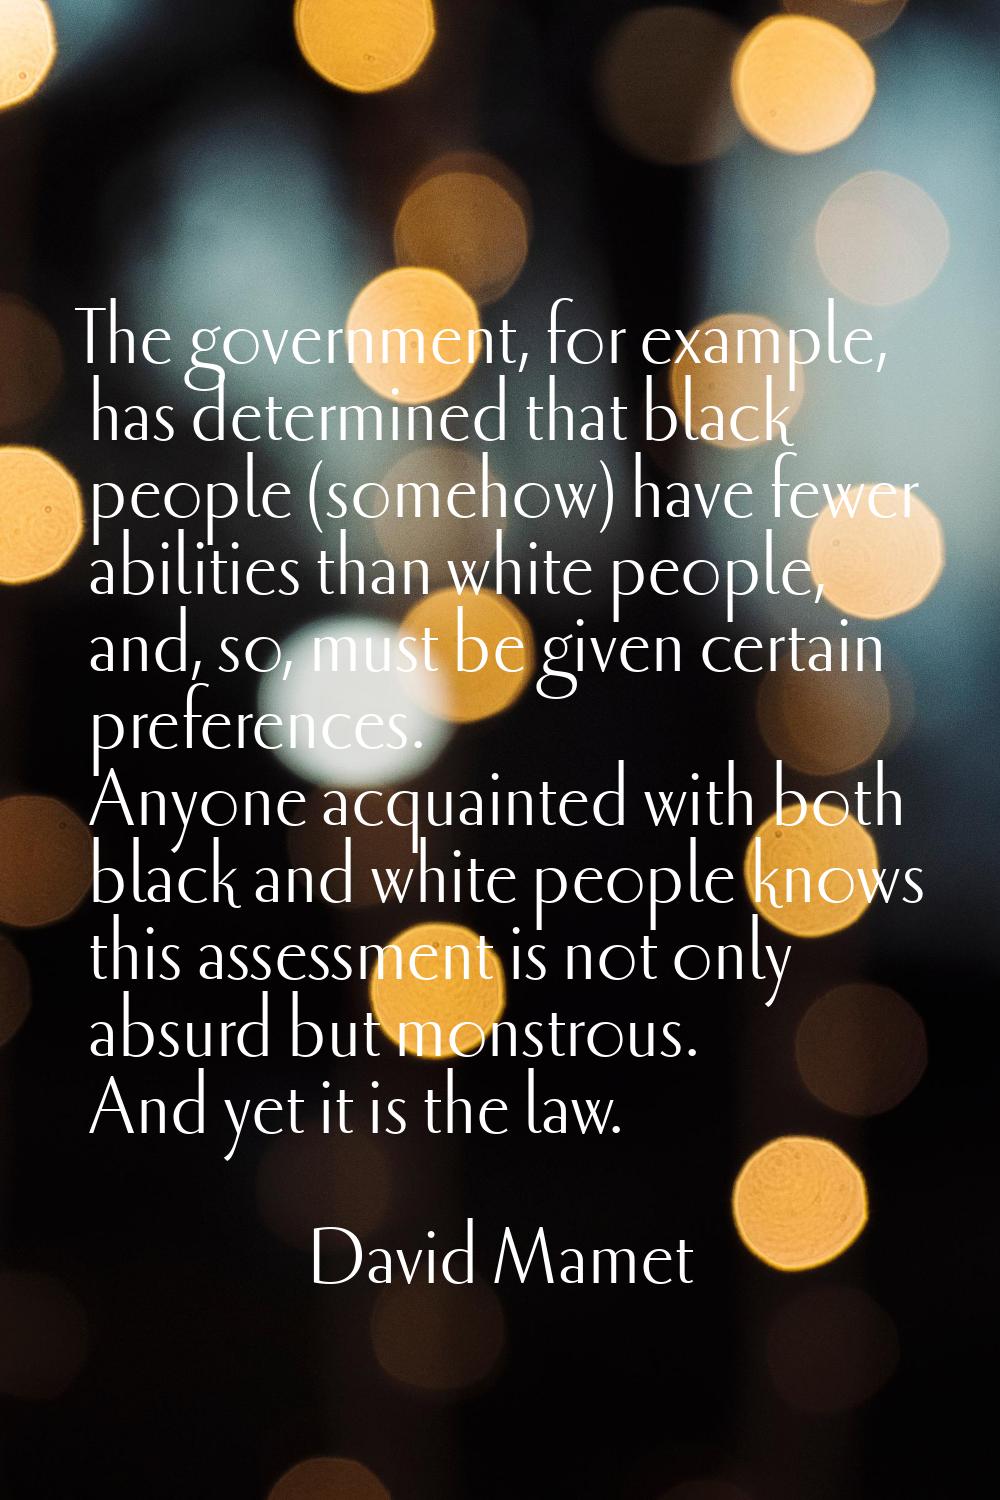 The government, for example, has determined that black people (somehow) have fewer abilities than w